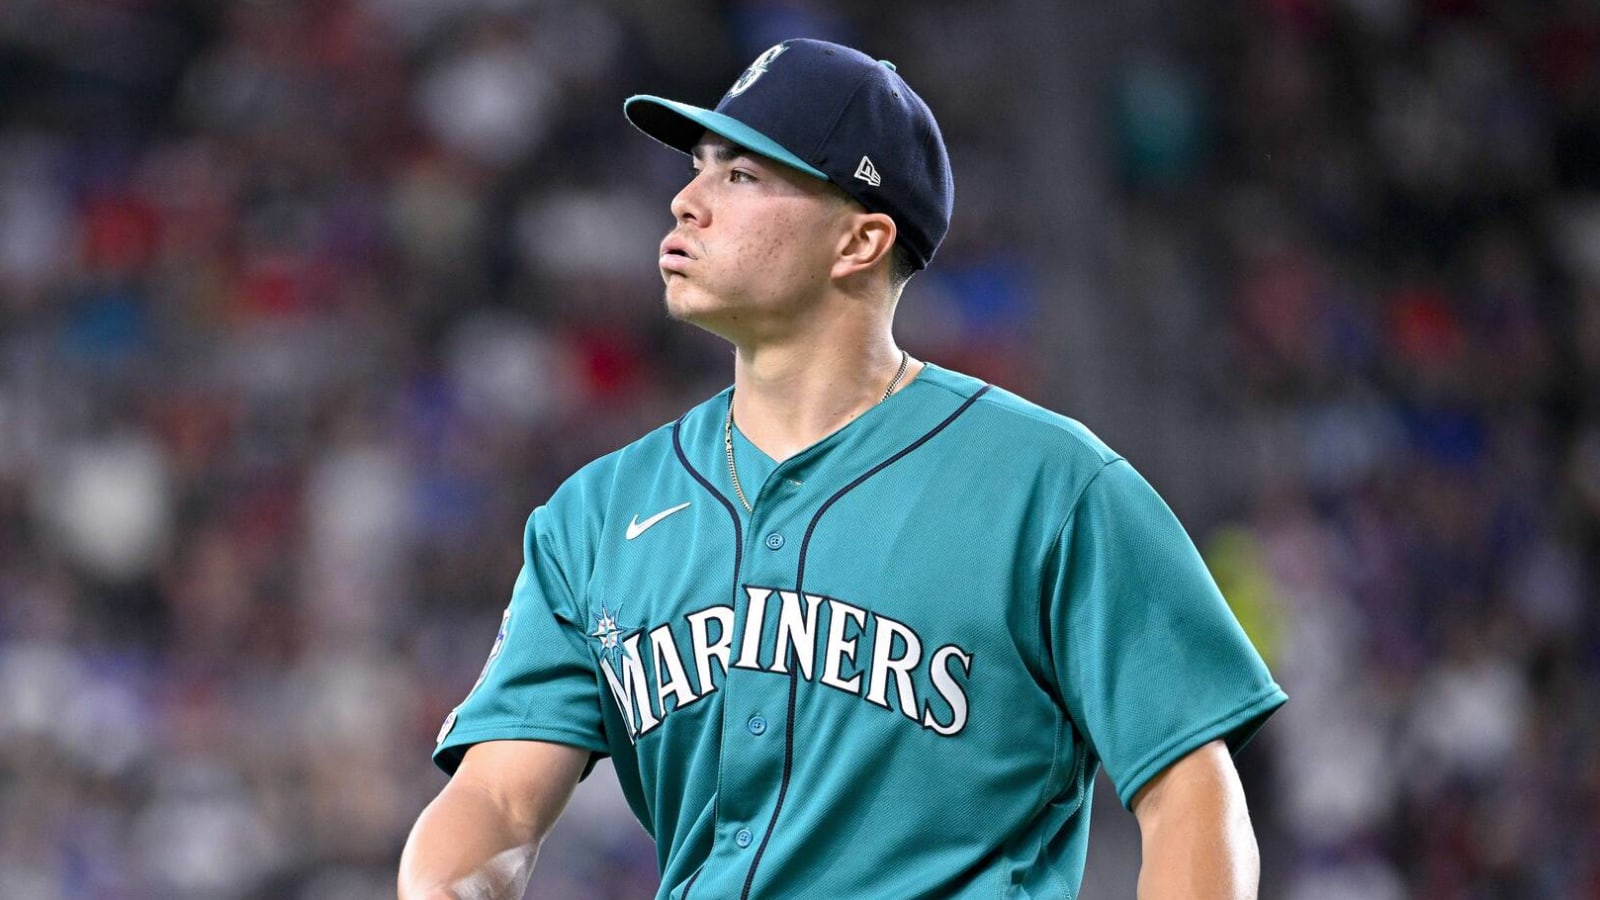 Mariners keeping prospect in rotation for now following rough debut